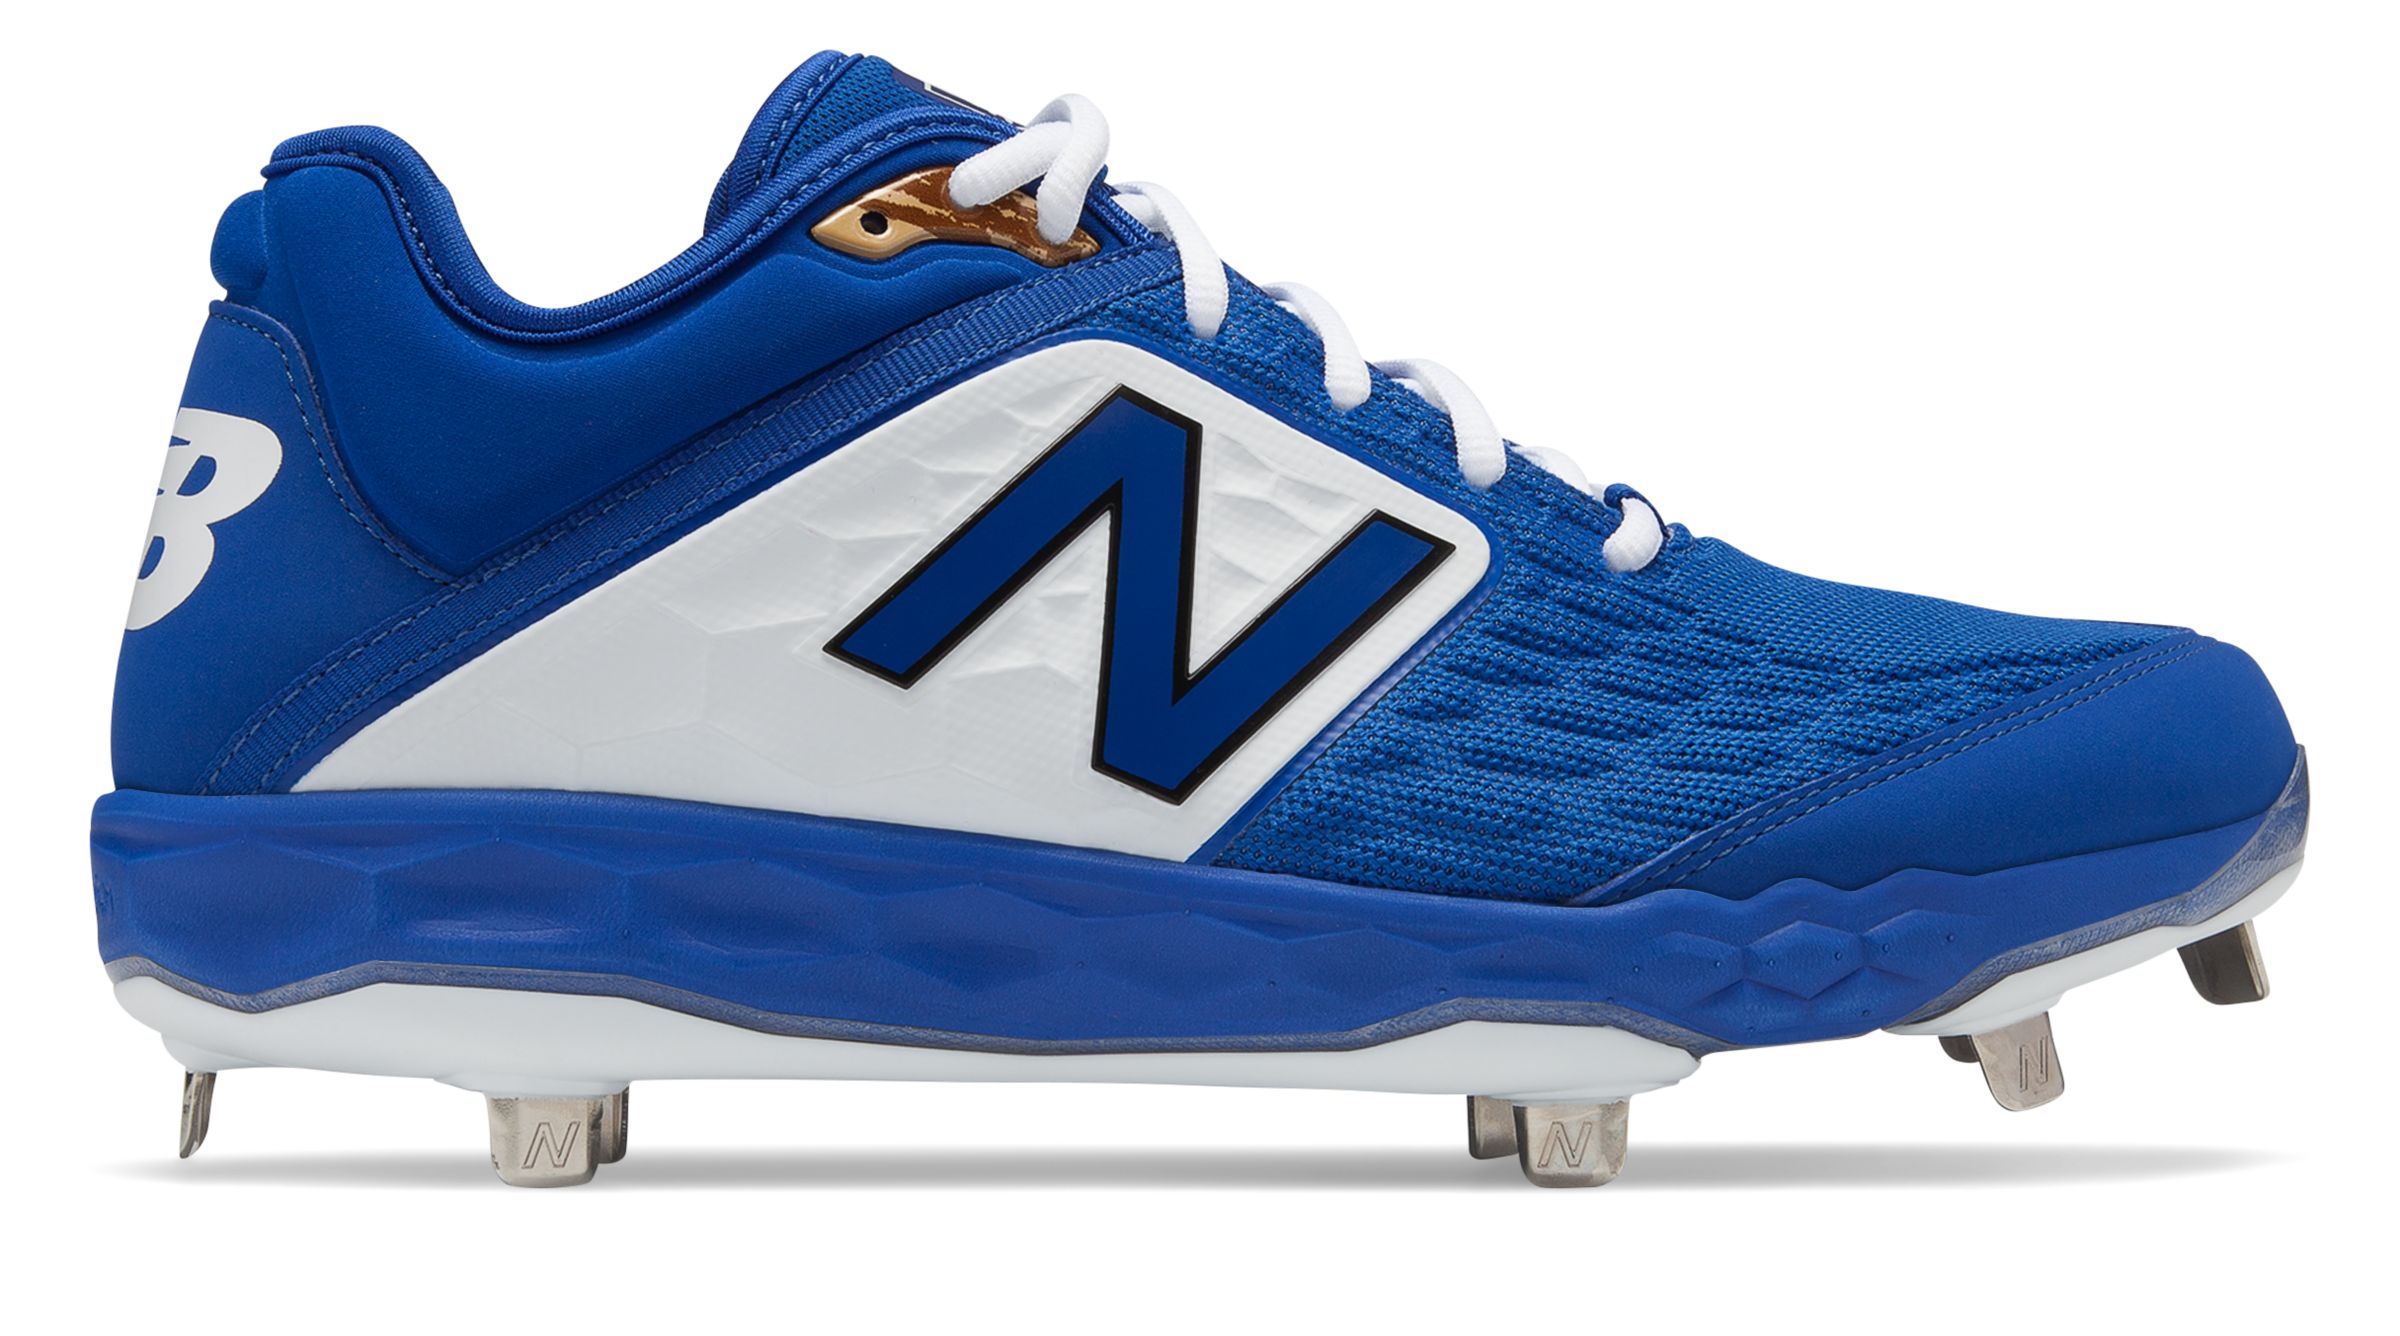 red white and blue new balance baseball cleats